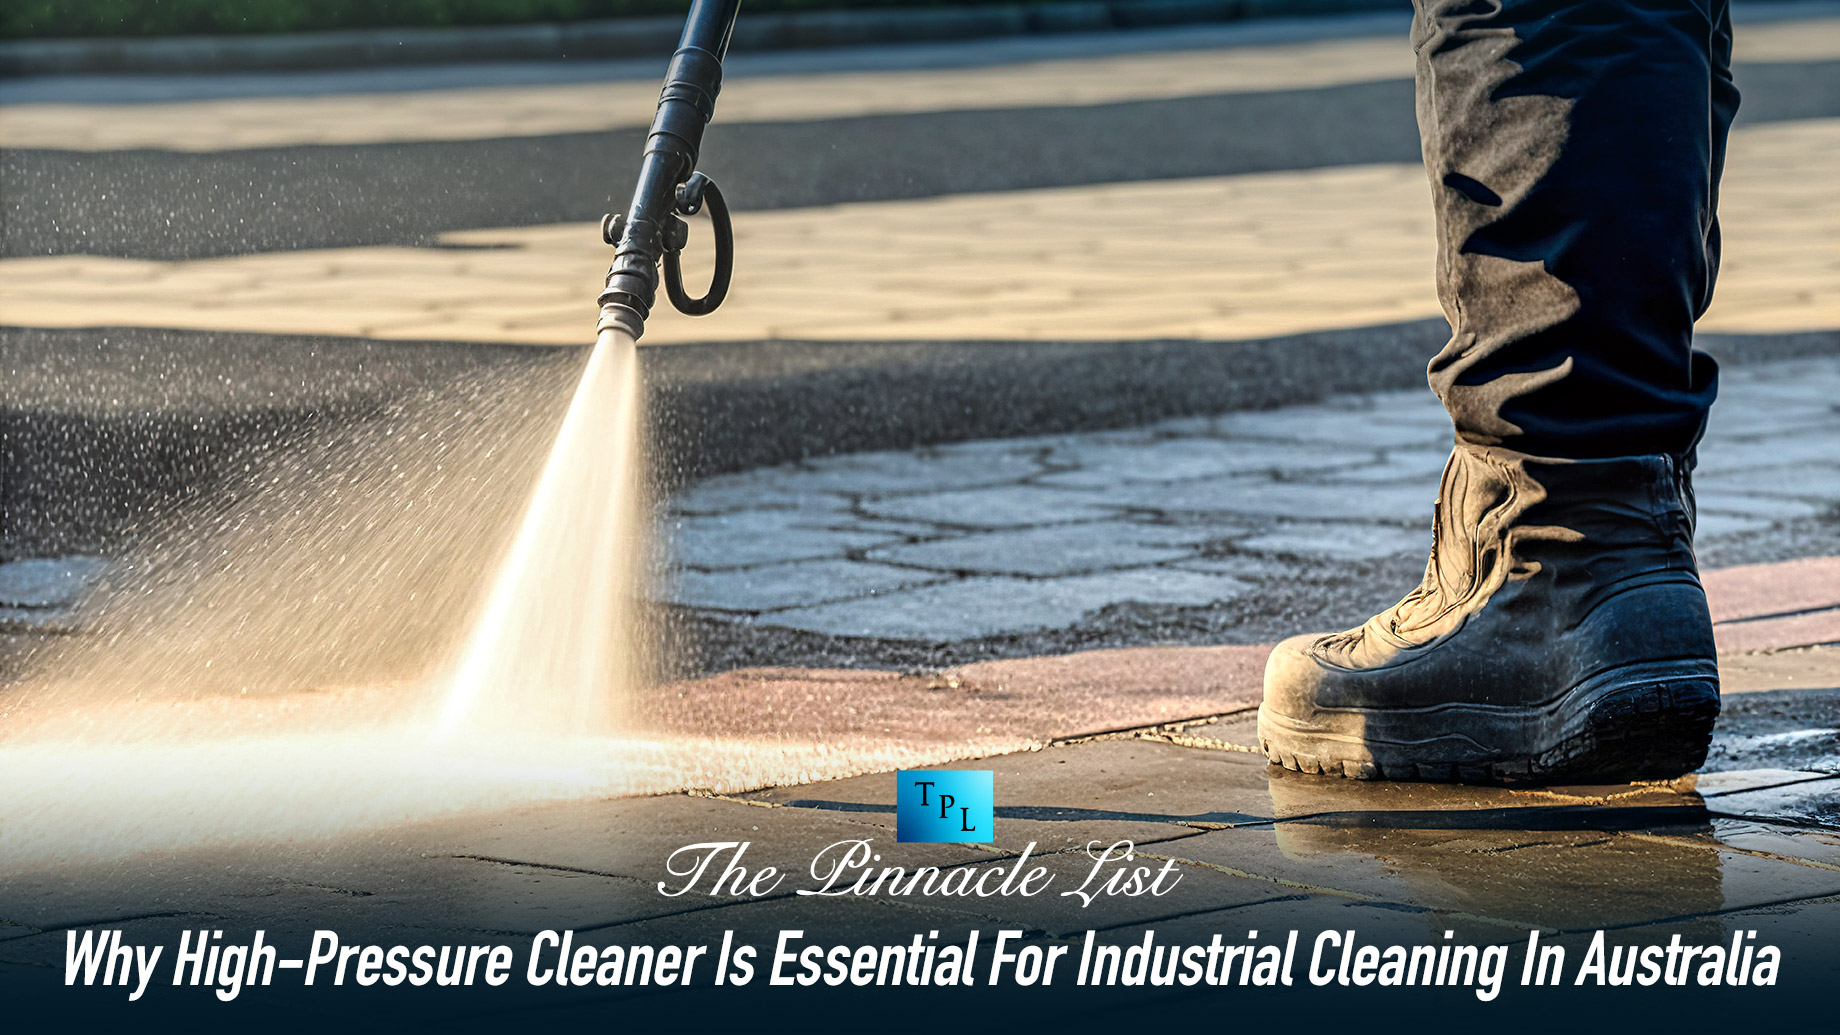 Why High-Pressure Cleaner Is Essential For Industrial Cleaning In Australia